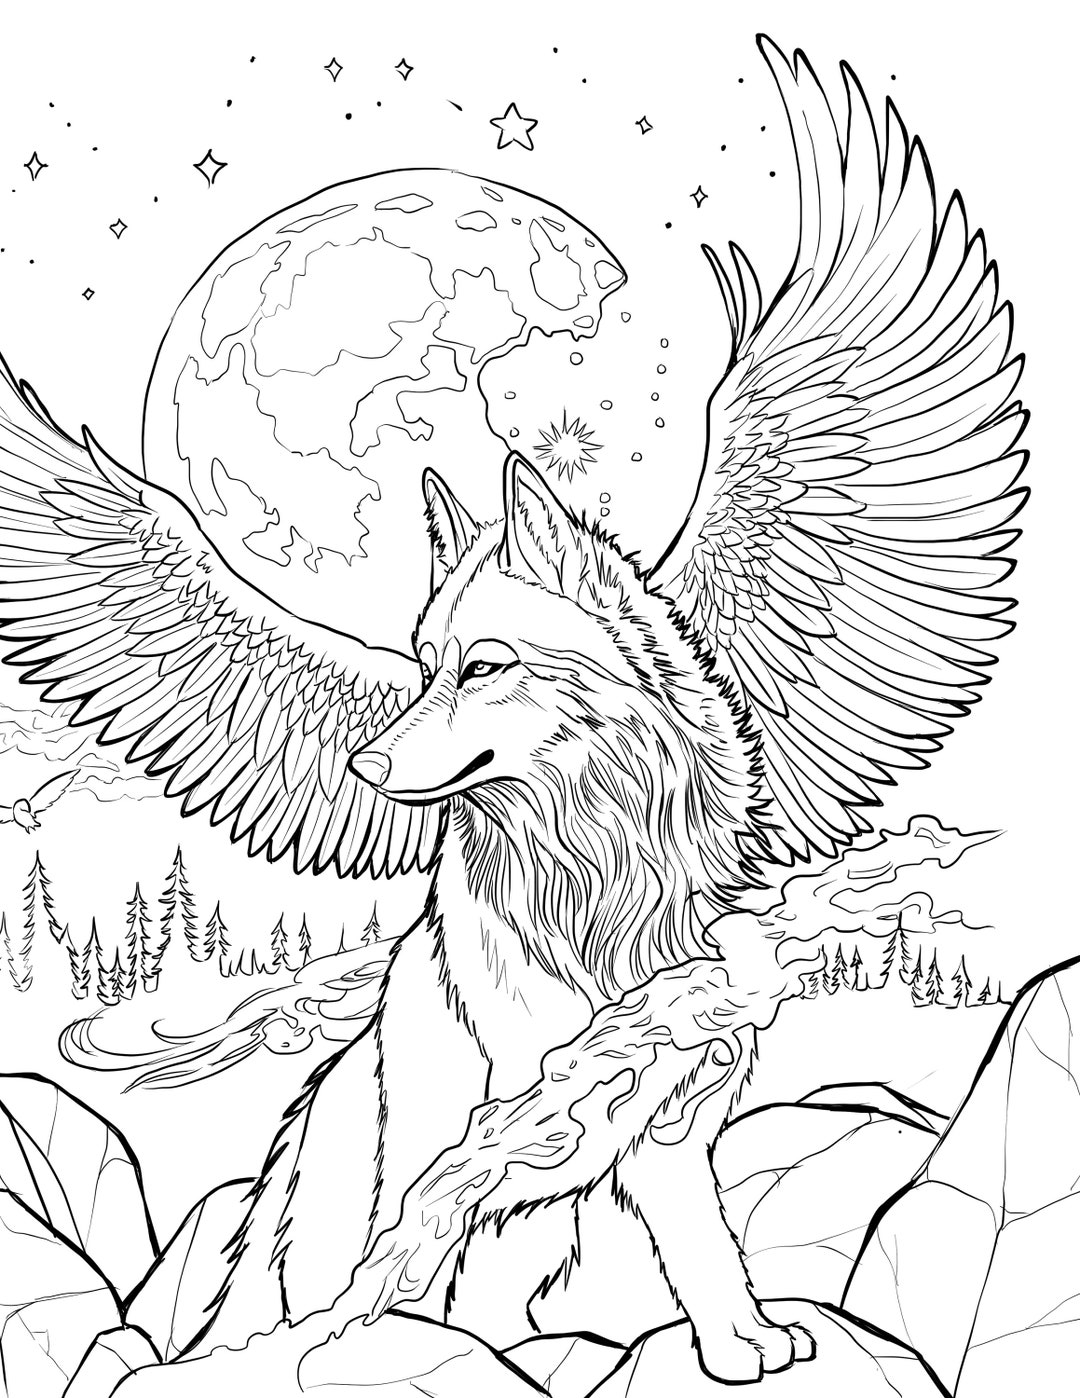 Celestial Wolf Adult Coloring Page Digital Download - Etsy